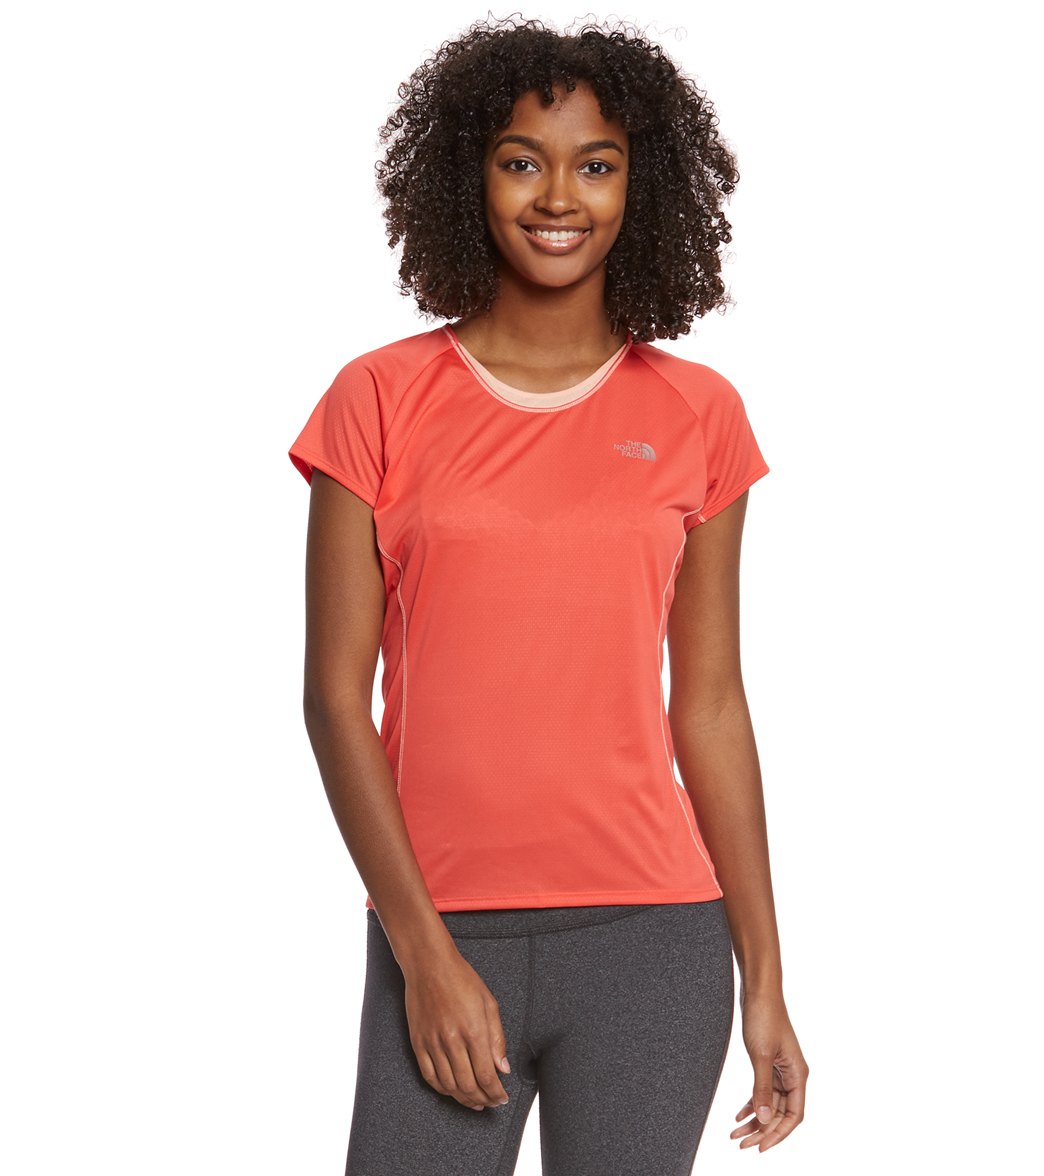 The North Face Women's Btn Short Sleeve Top - Cayenne Red/Tropical Peach Medium Polyester - Swimoutlet.com